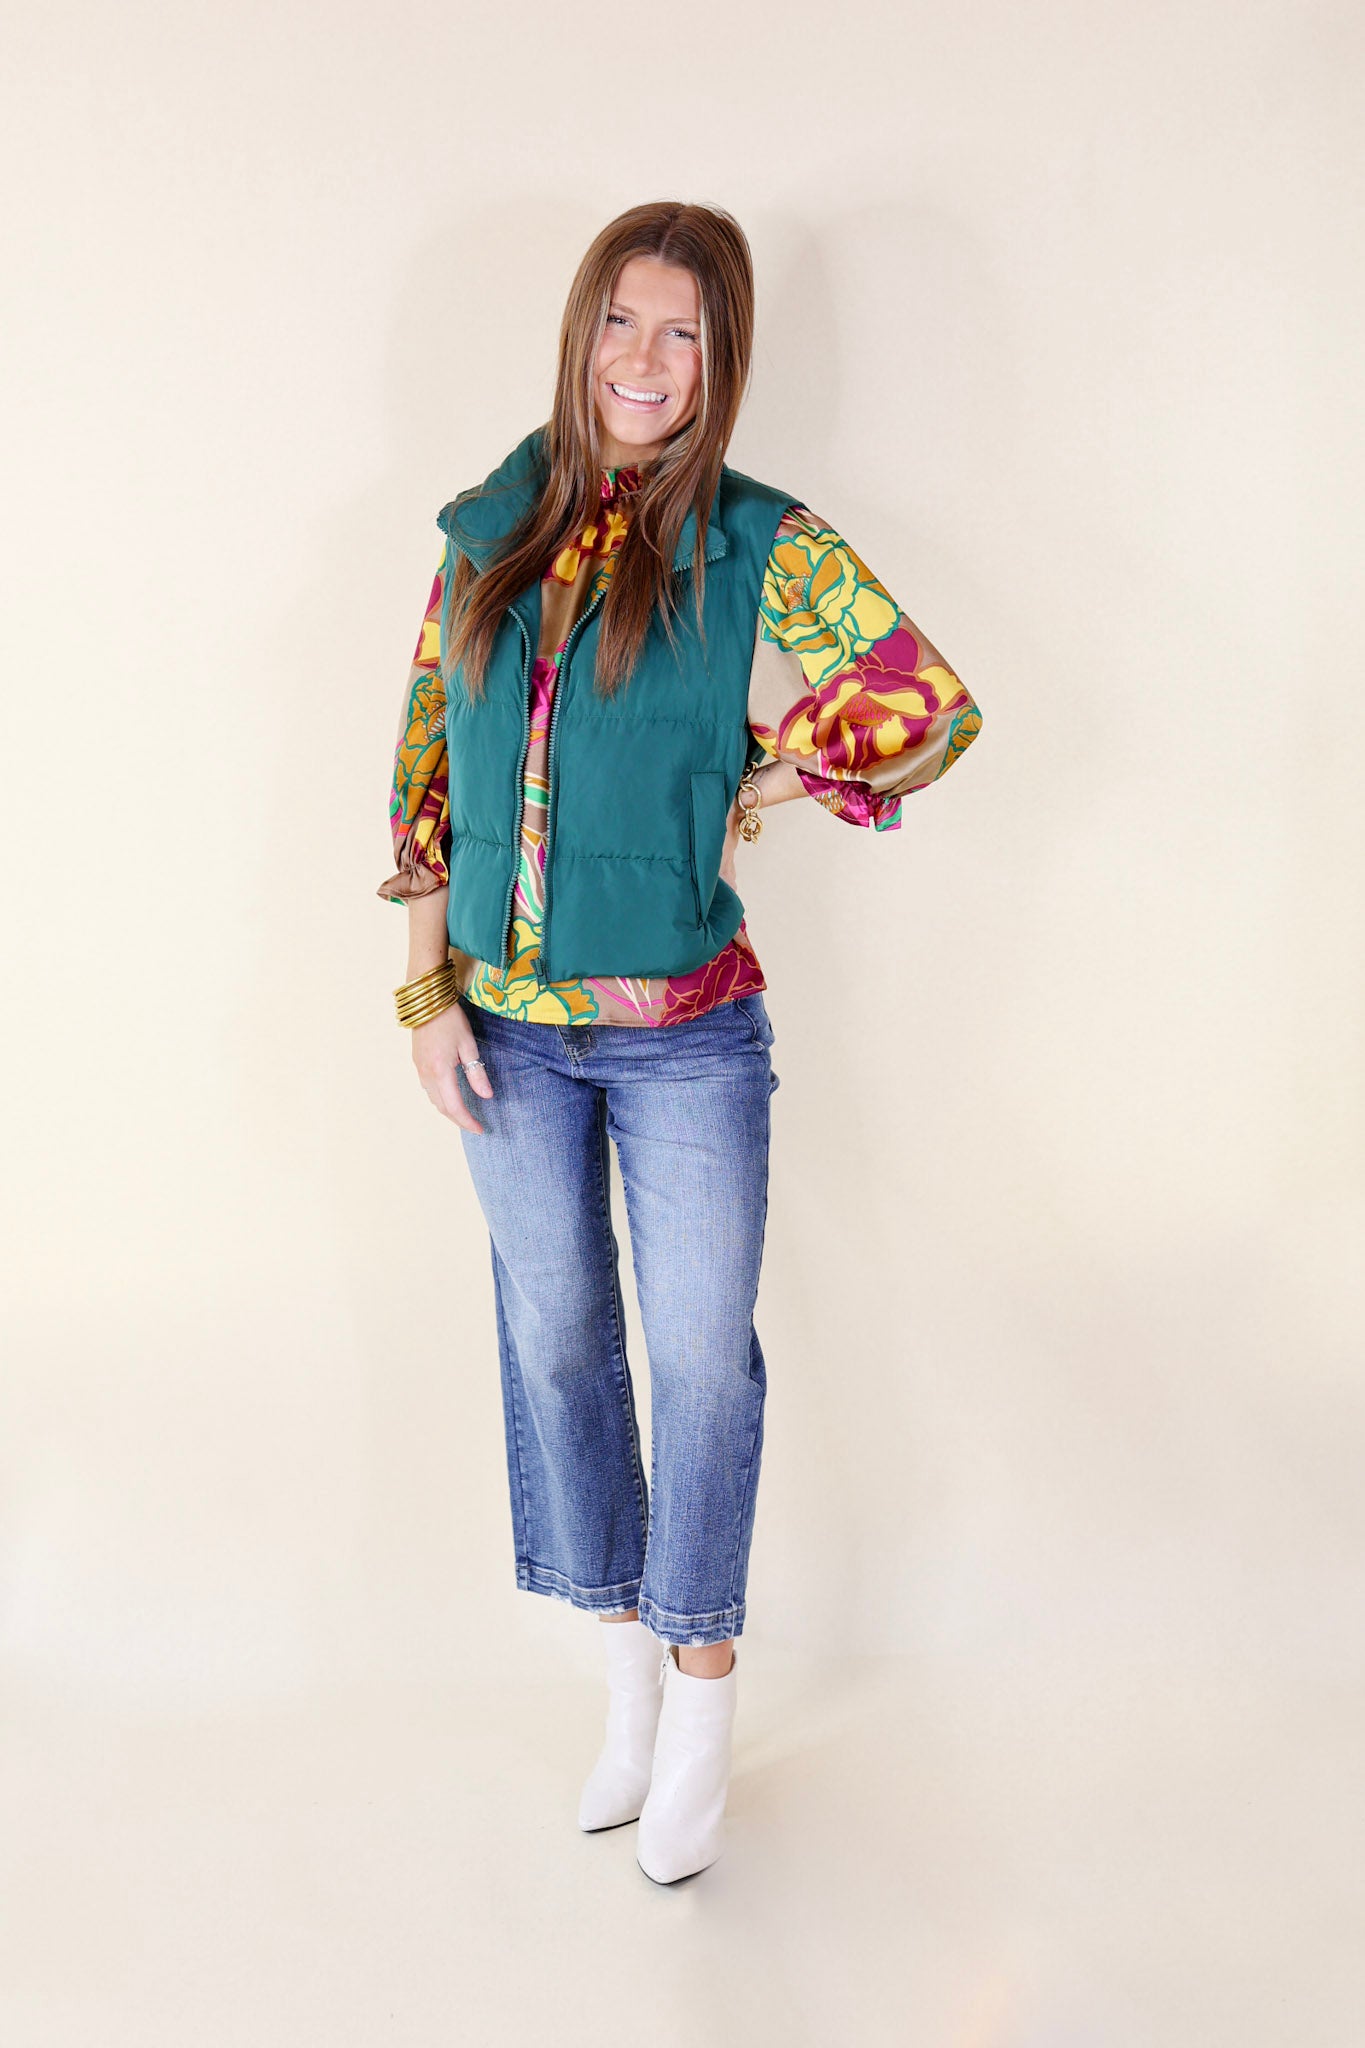 Whispering Pines Puffer Vest in Hunter Green - Giddy Up Glamour Boutique